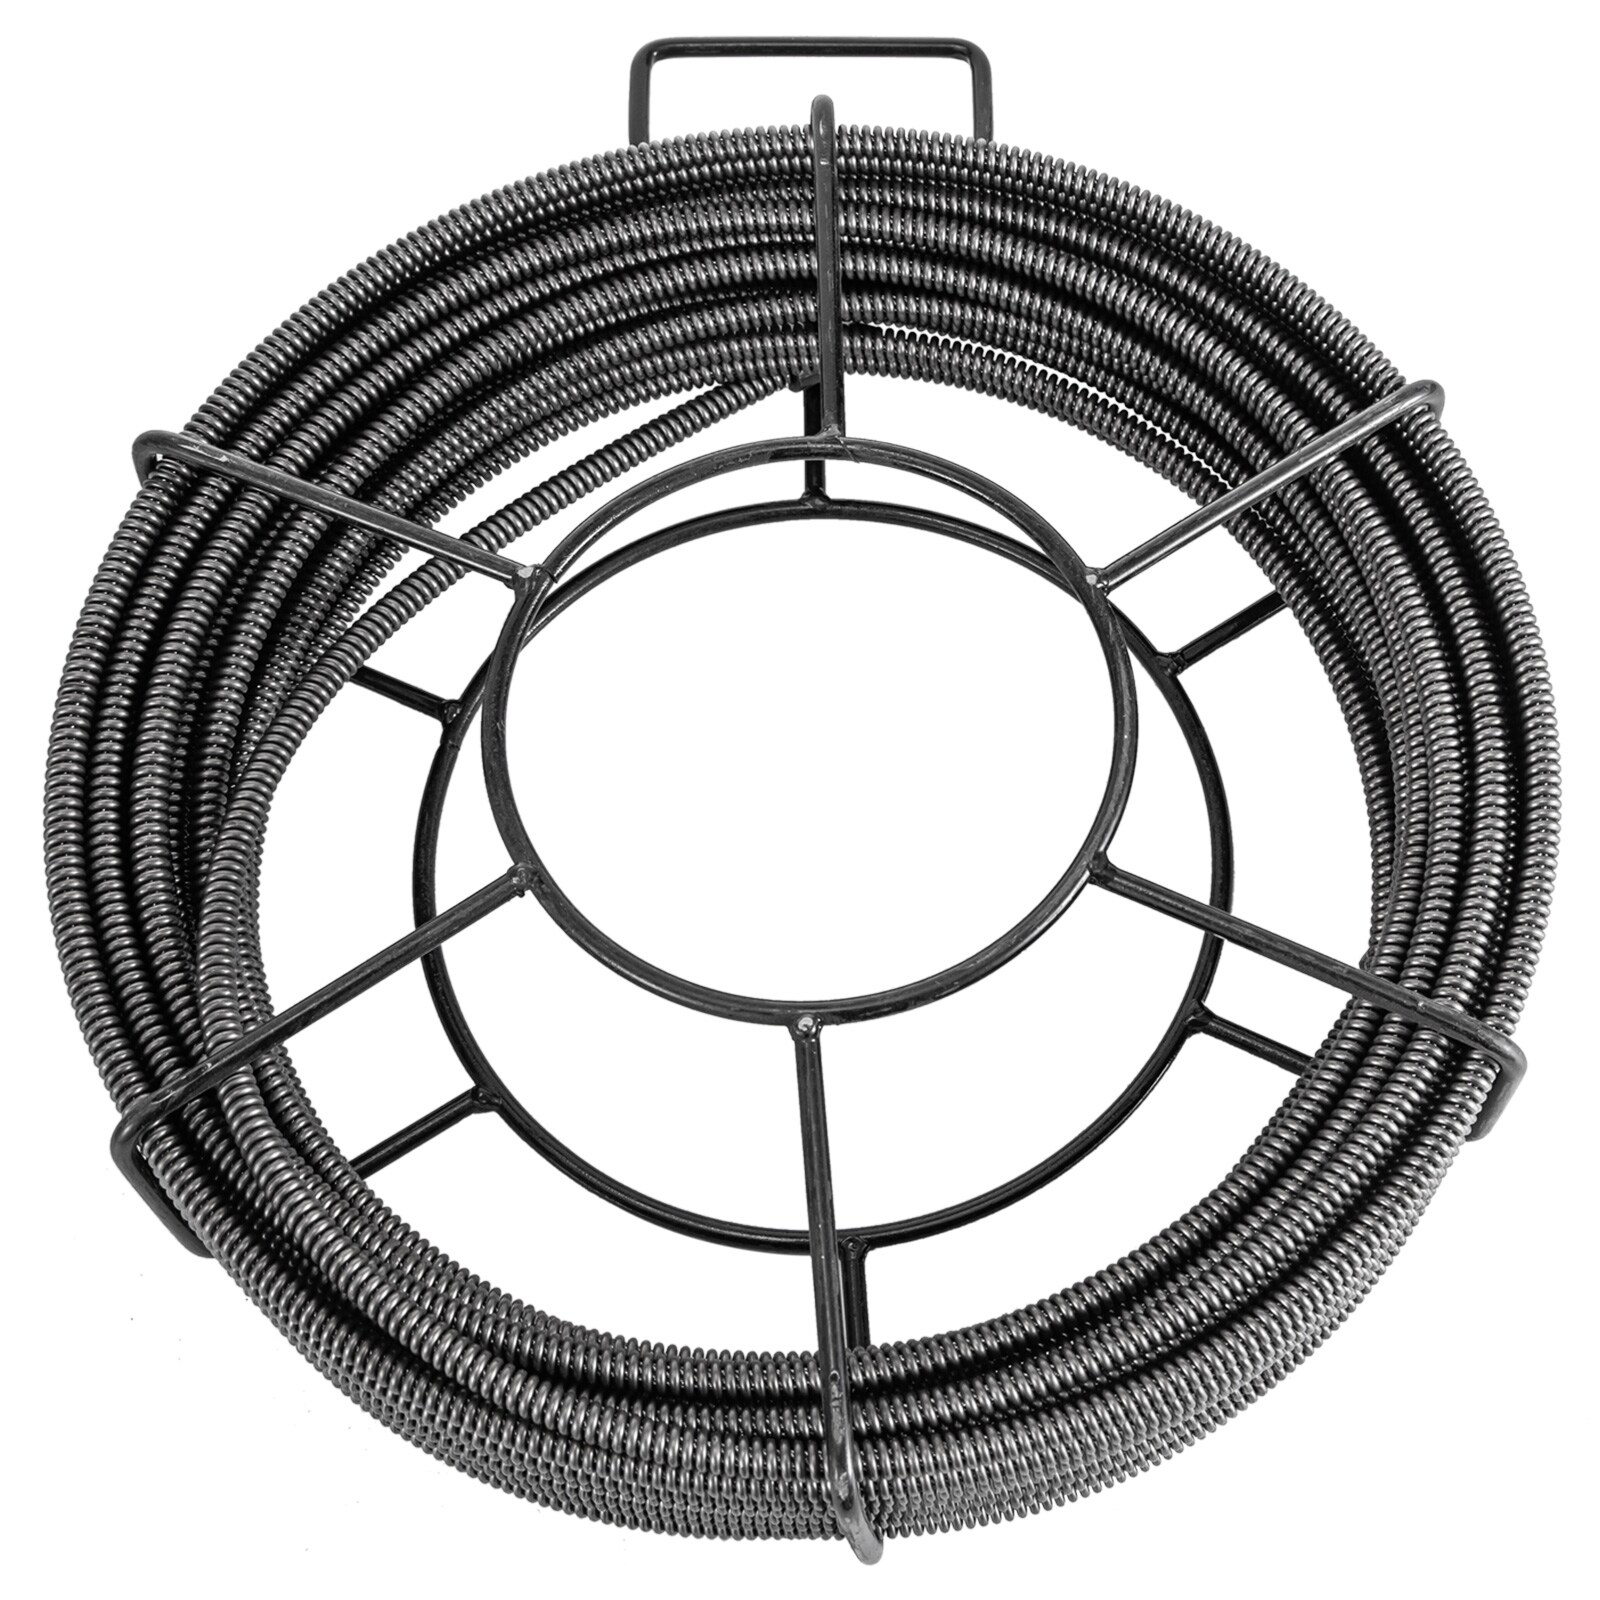 VEVORbrand Drain Cleaning Cable 100 Feet x 1/2 inch Solid Core Cable Sewer  Cable Drain Auger Cable Cleaner Snake